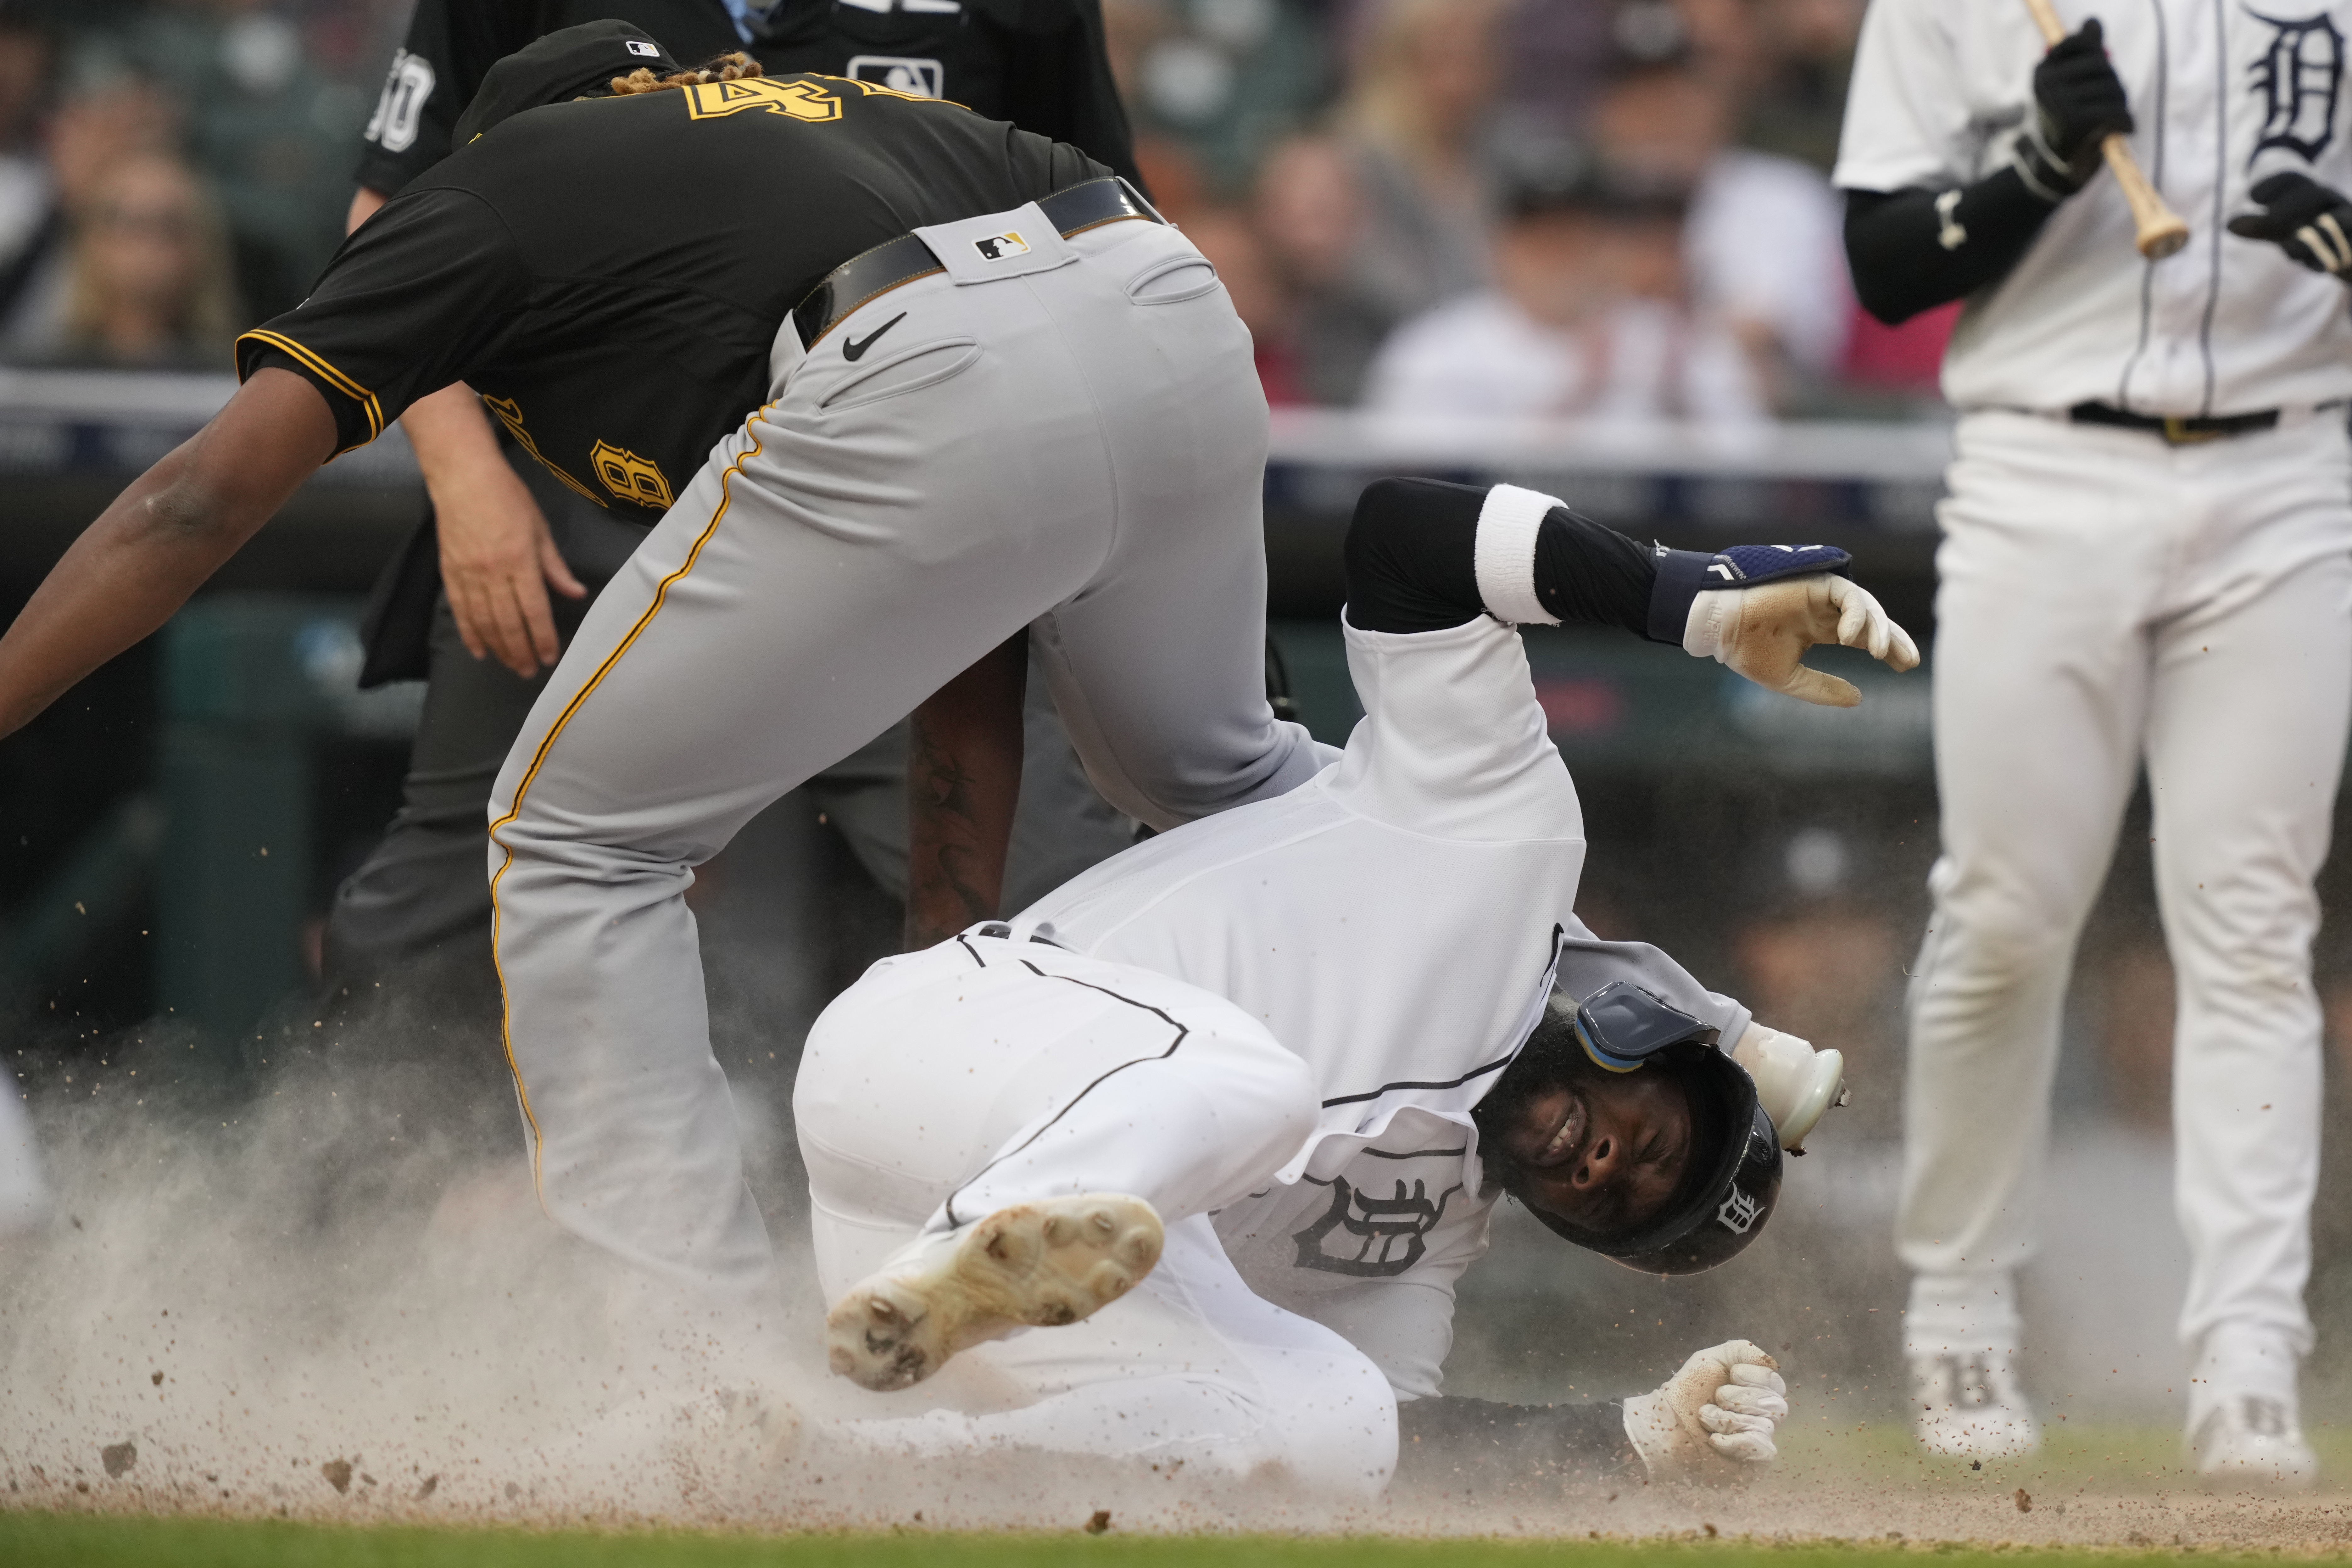 How to Watch the Tigers vs. Pirates Game: Streaming & TV Info